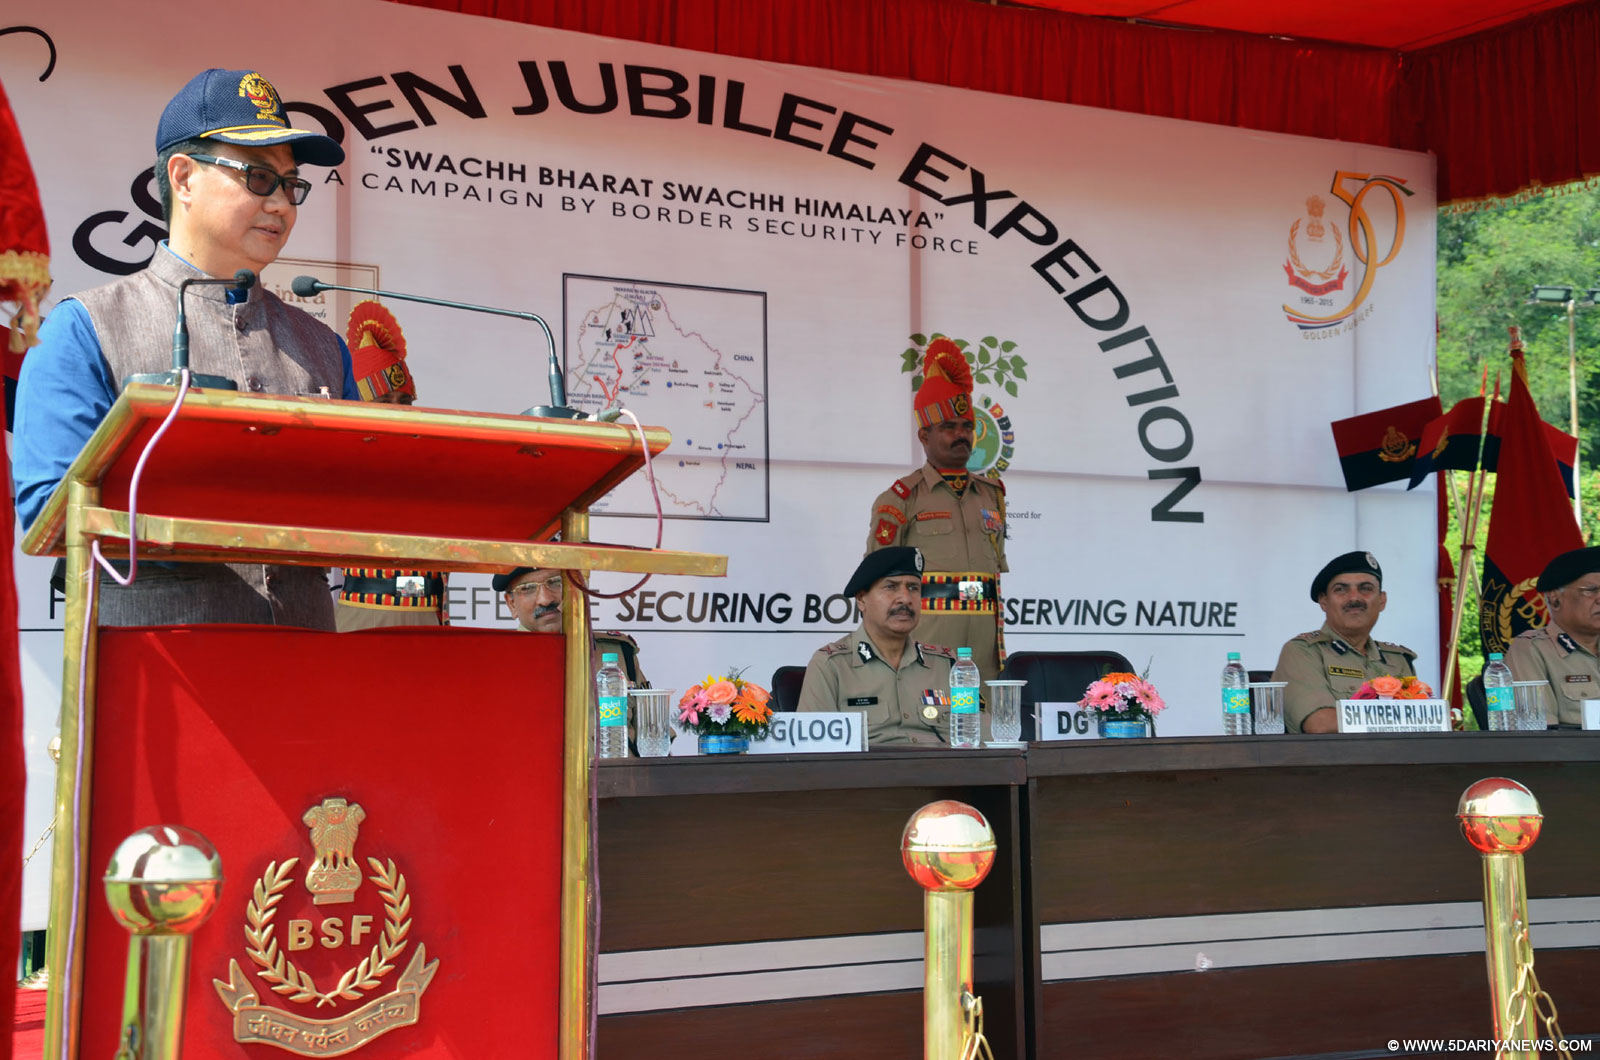 The Minister of State for Home Affairs, Shri Kiren Rijiju addressing at the flag off ceremony of the ‘Swachh Bharat, Swachh Himalaya’ campaign of the Border Security Force, in New Delhi on October 12, 2015. The Director General, BSF, Shri D.K. Pathak is also seen.